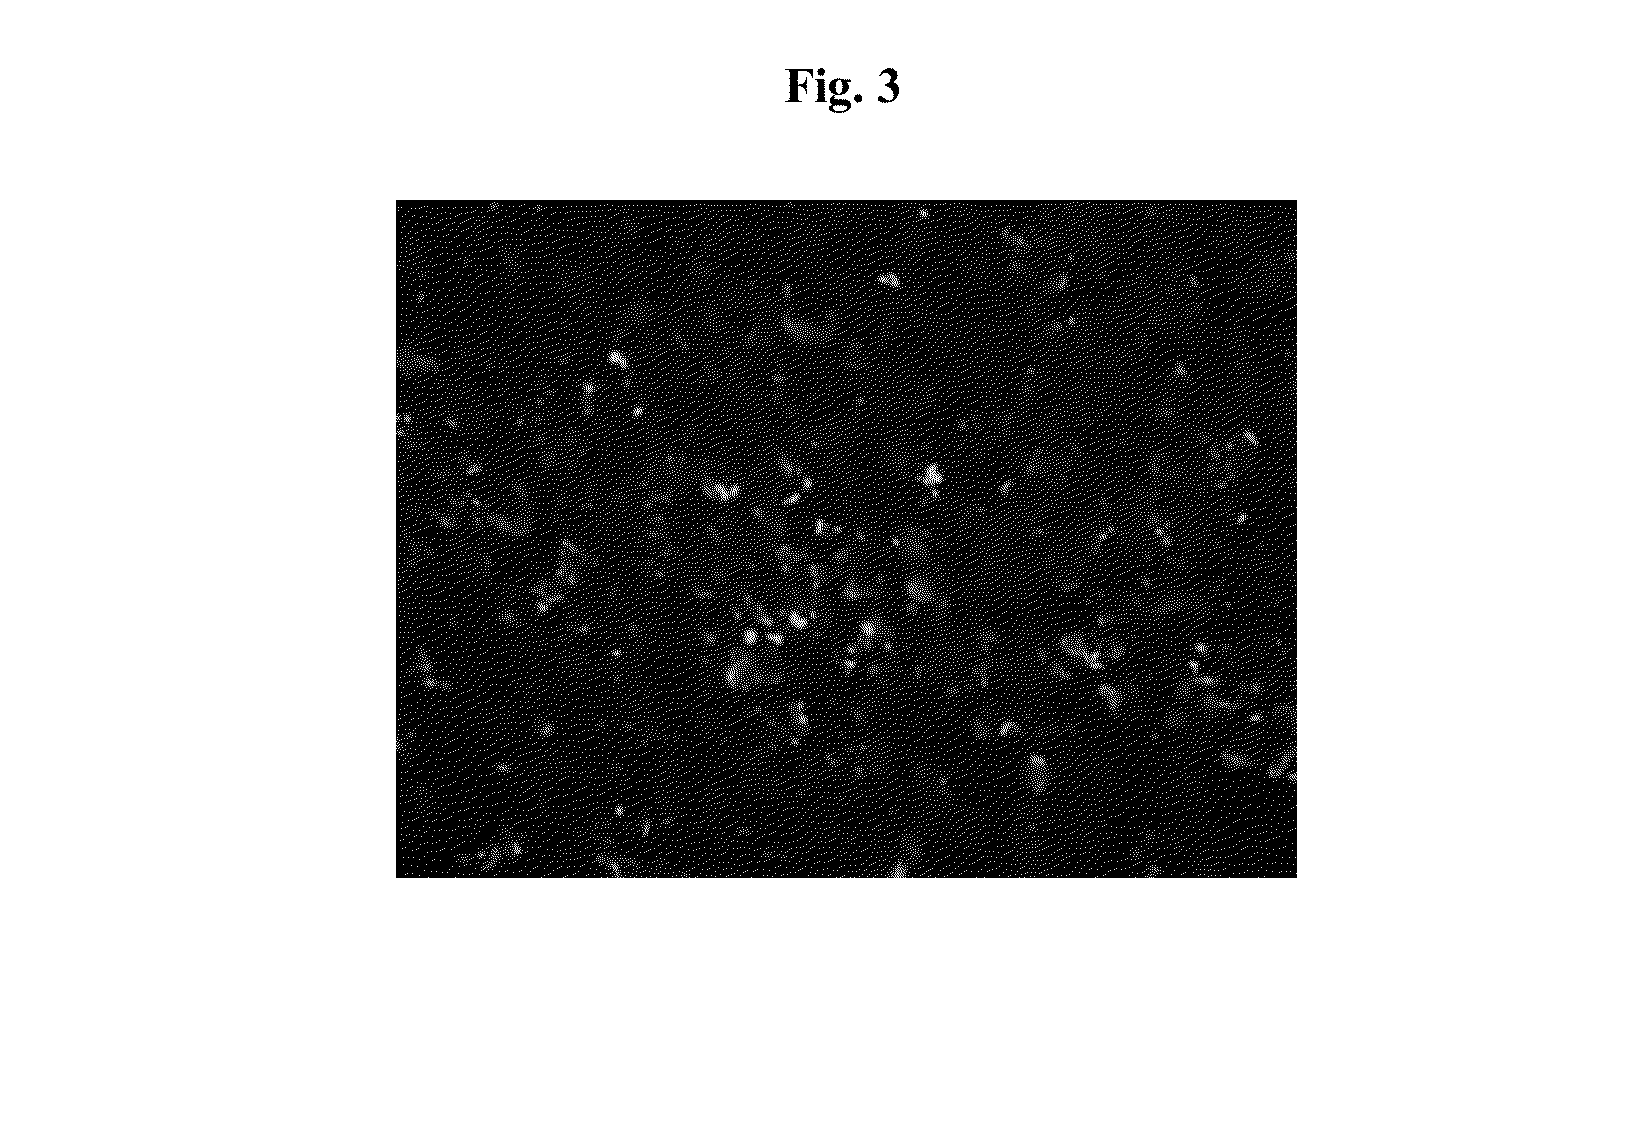 Engineered three-dimensional connective tissue constructs and methods of making the same